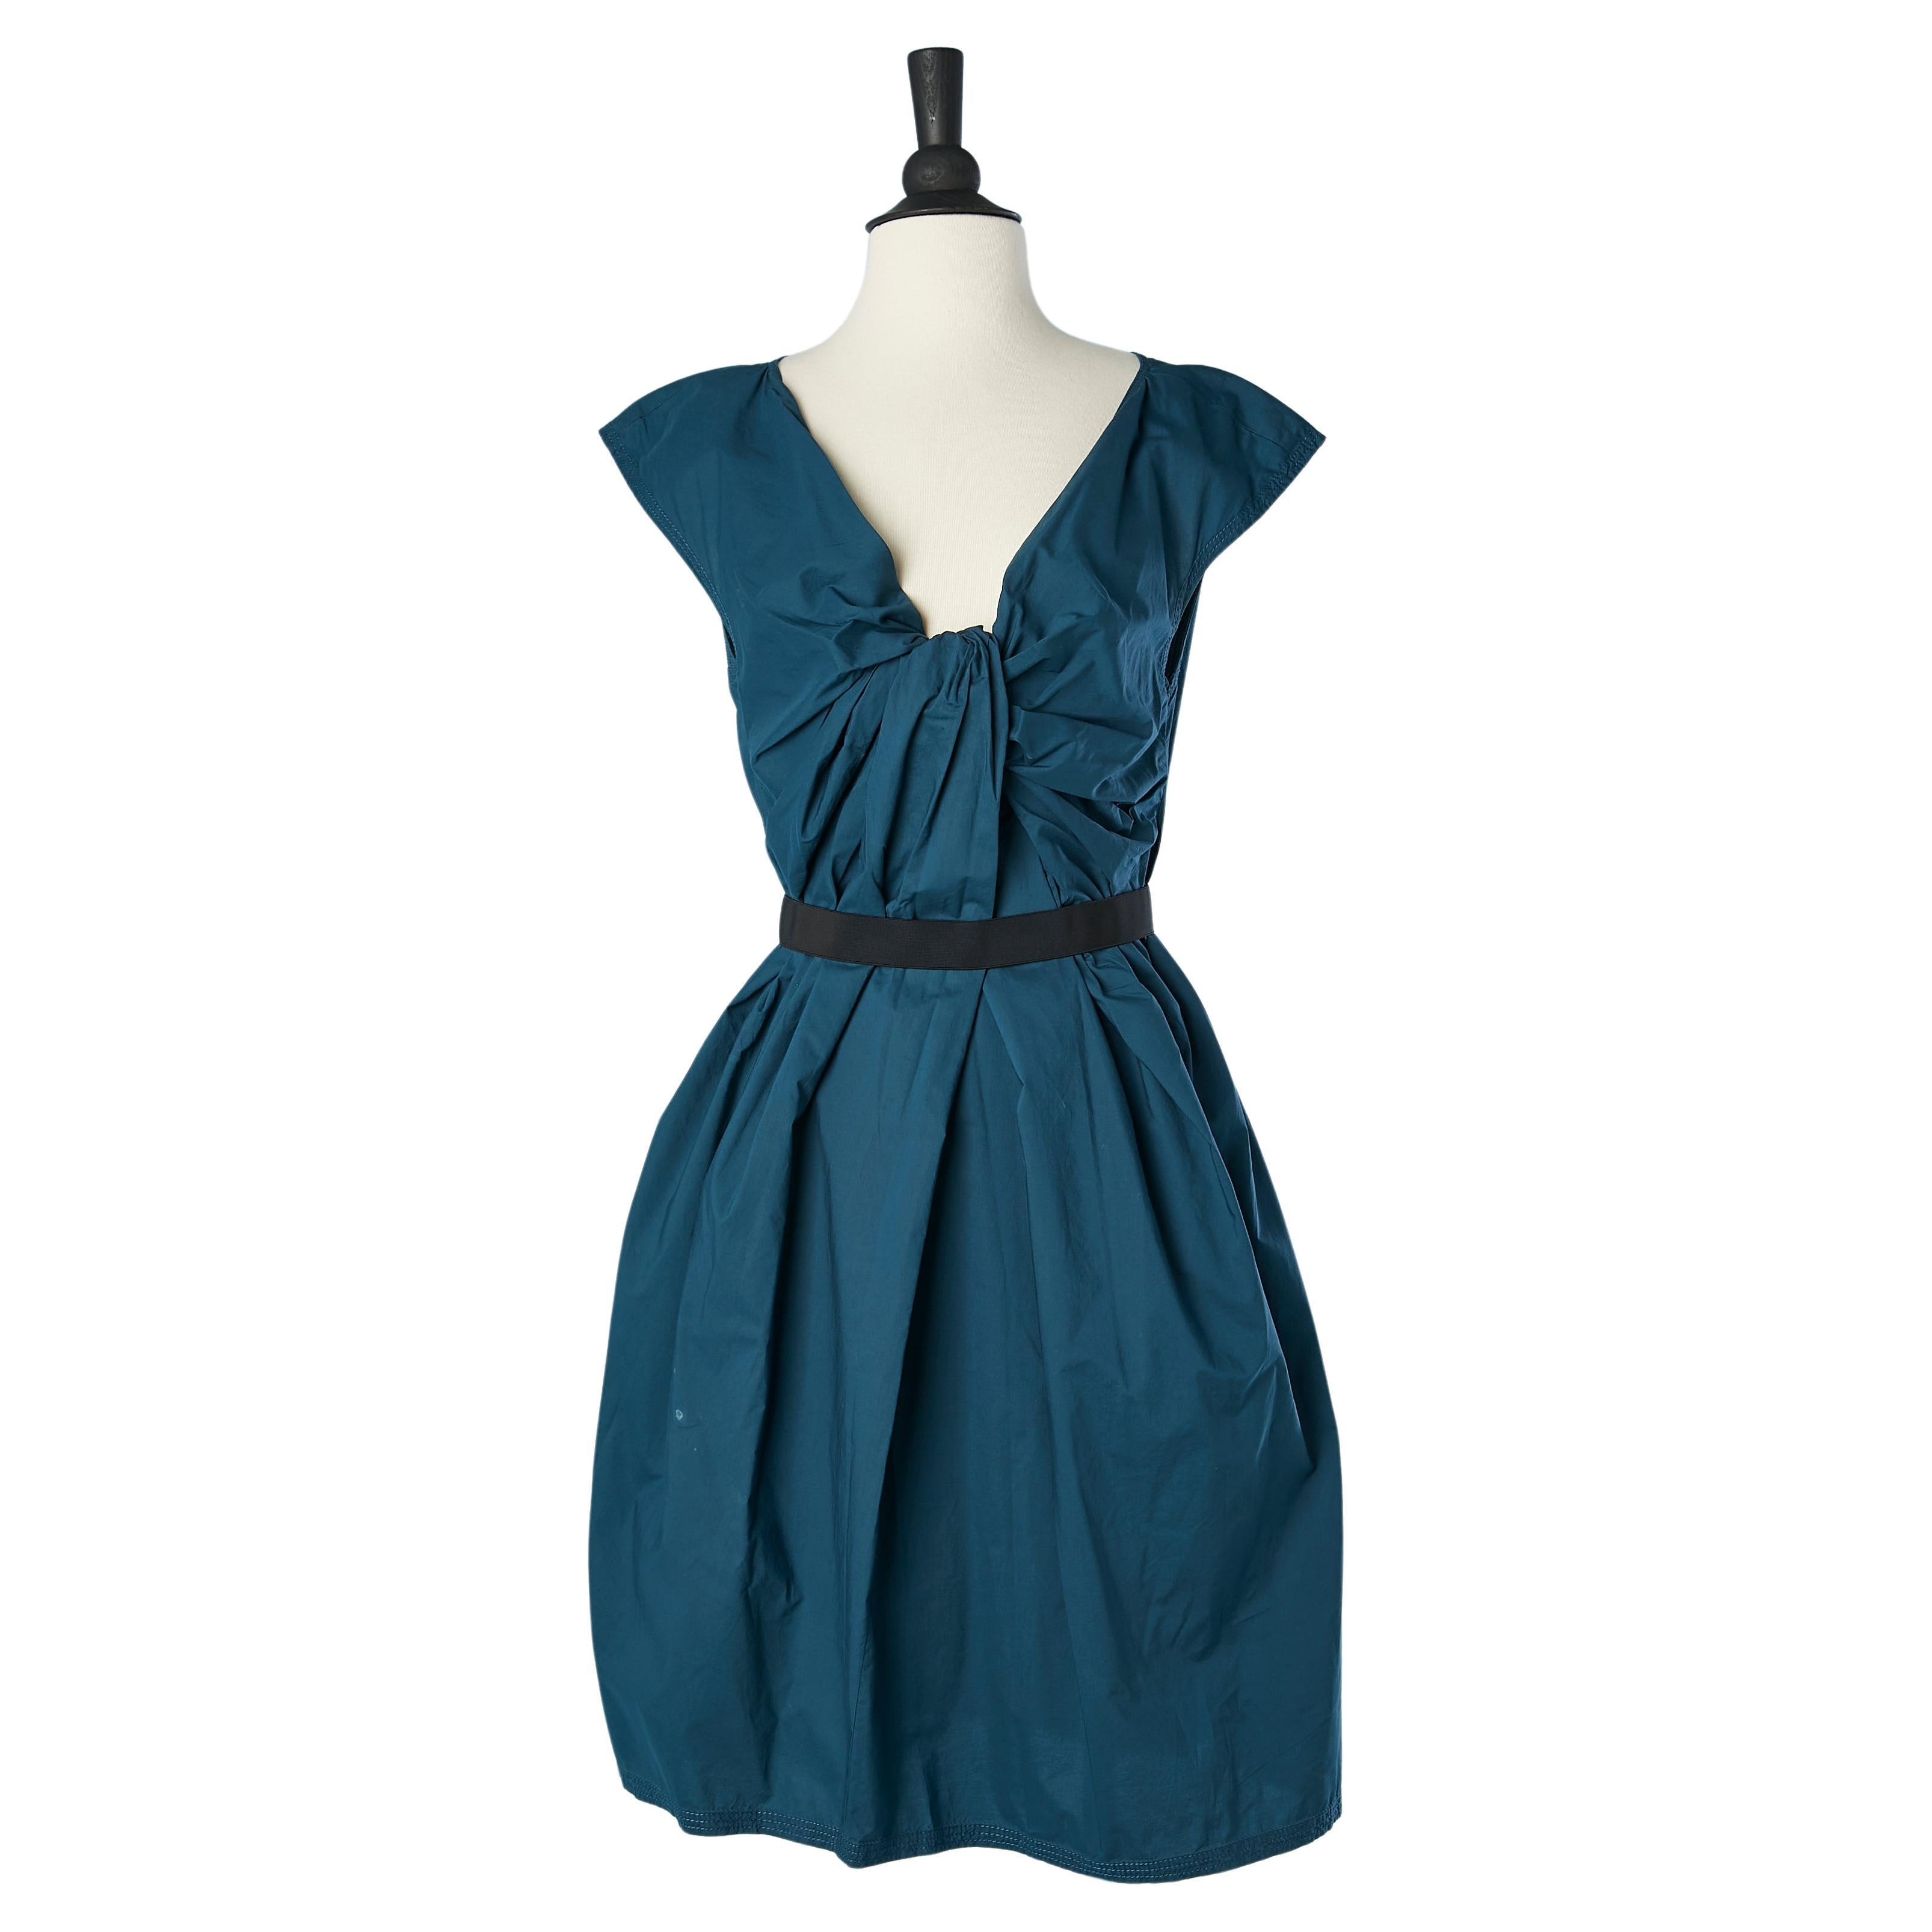 Blue cotton sleeveless dress with drape in the front Lanvin by Alber Elbaz For Sale